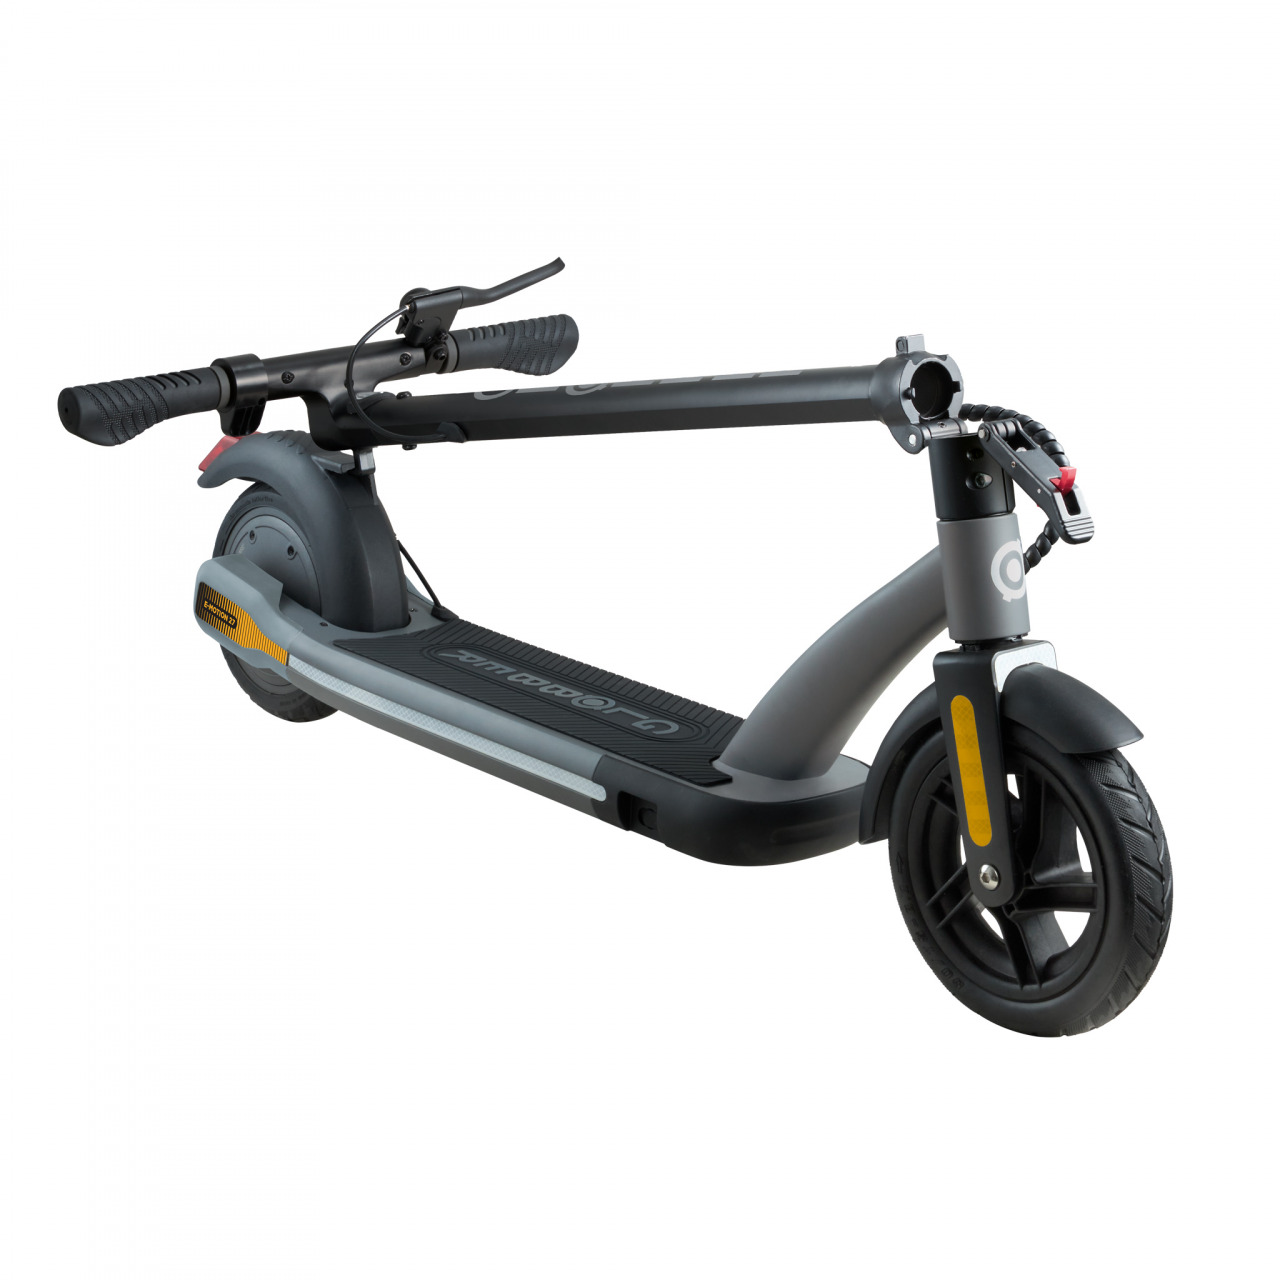 752 199 Portable Big Wheel Electric Scooter